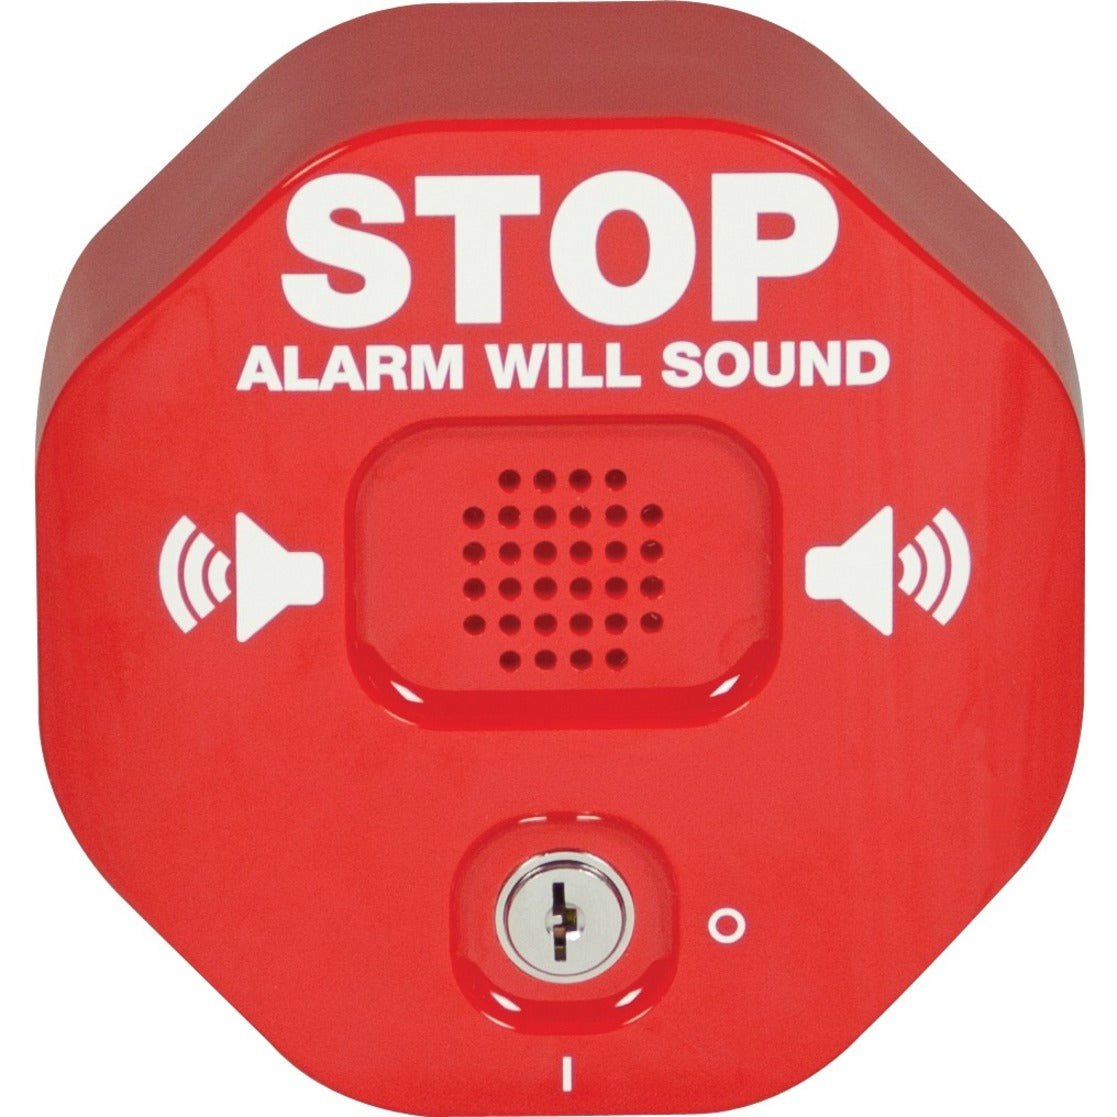 STI STI-6400 Exit Stopper Multifunction Door Alarm, Highly Visible Deterrent, Battery Powered